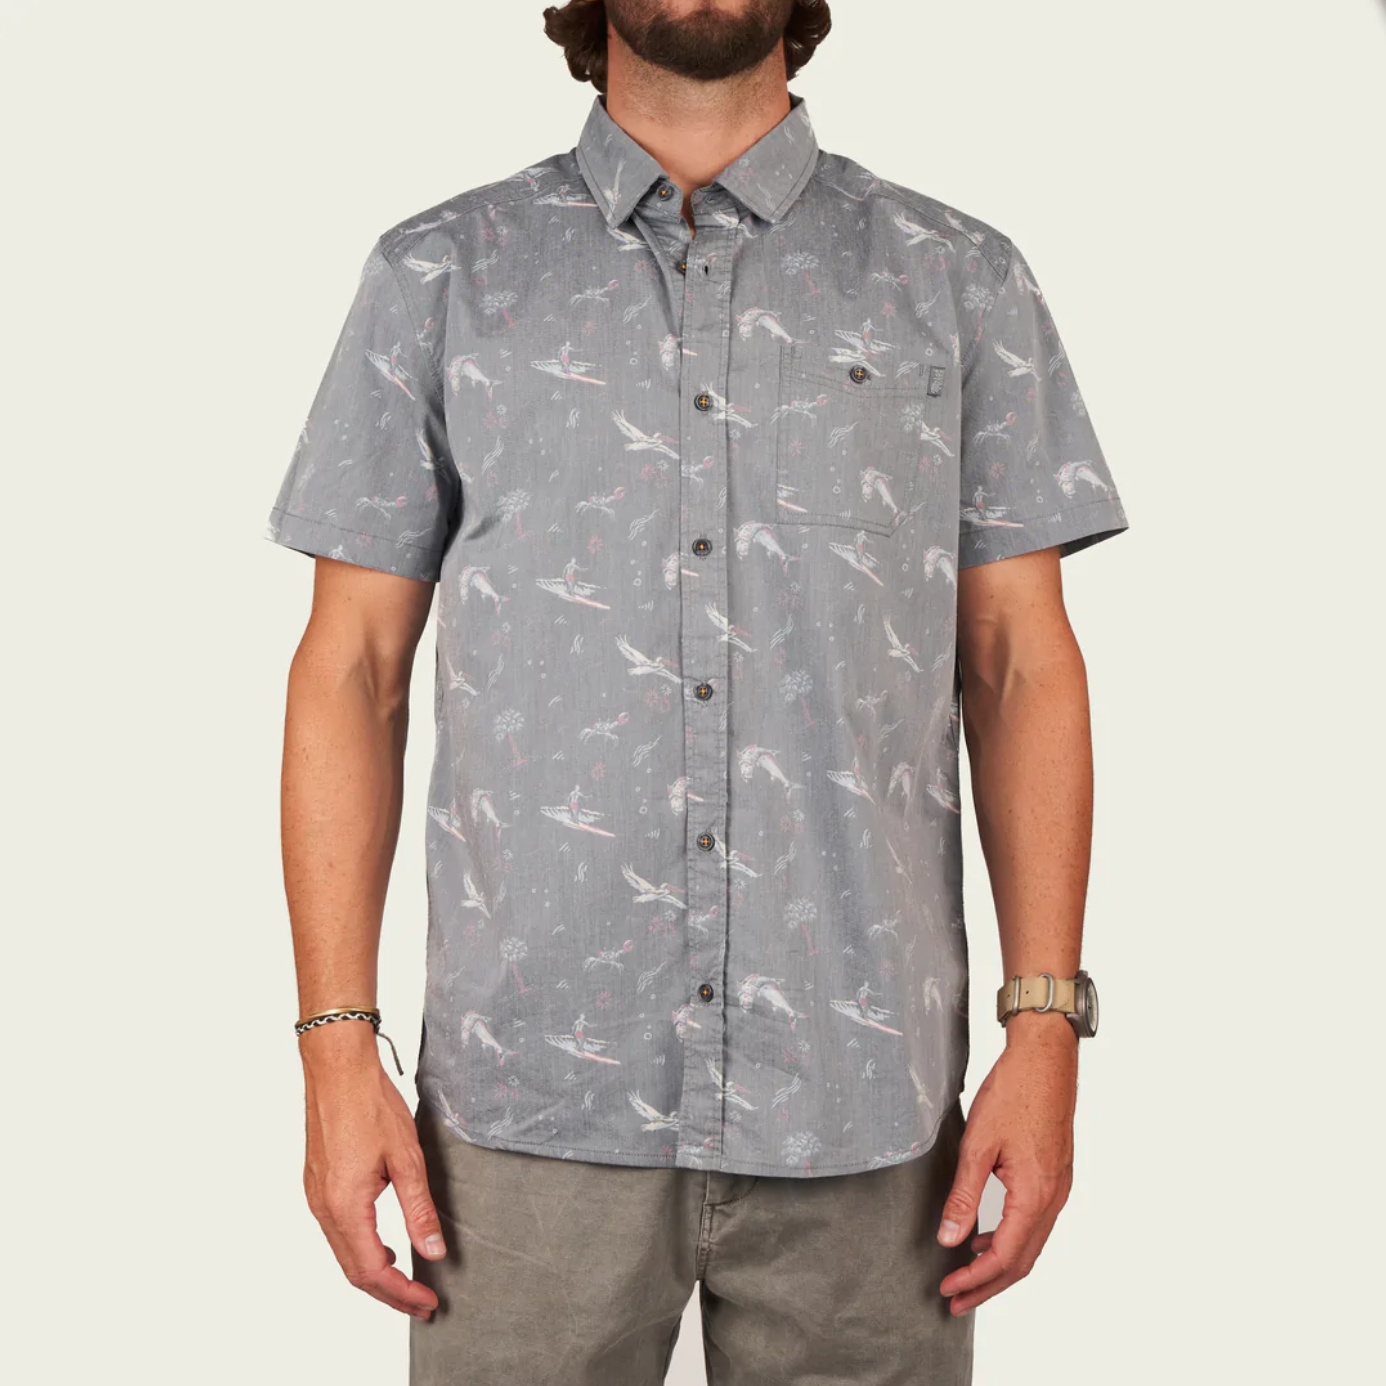 Marsh Wear SS 2.0 Button Up Charcoal